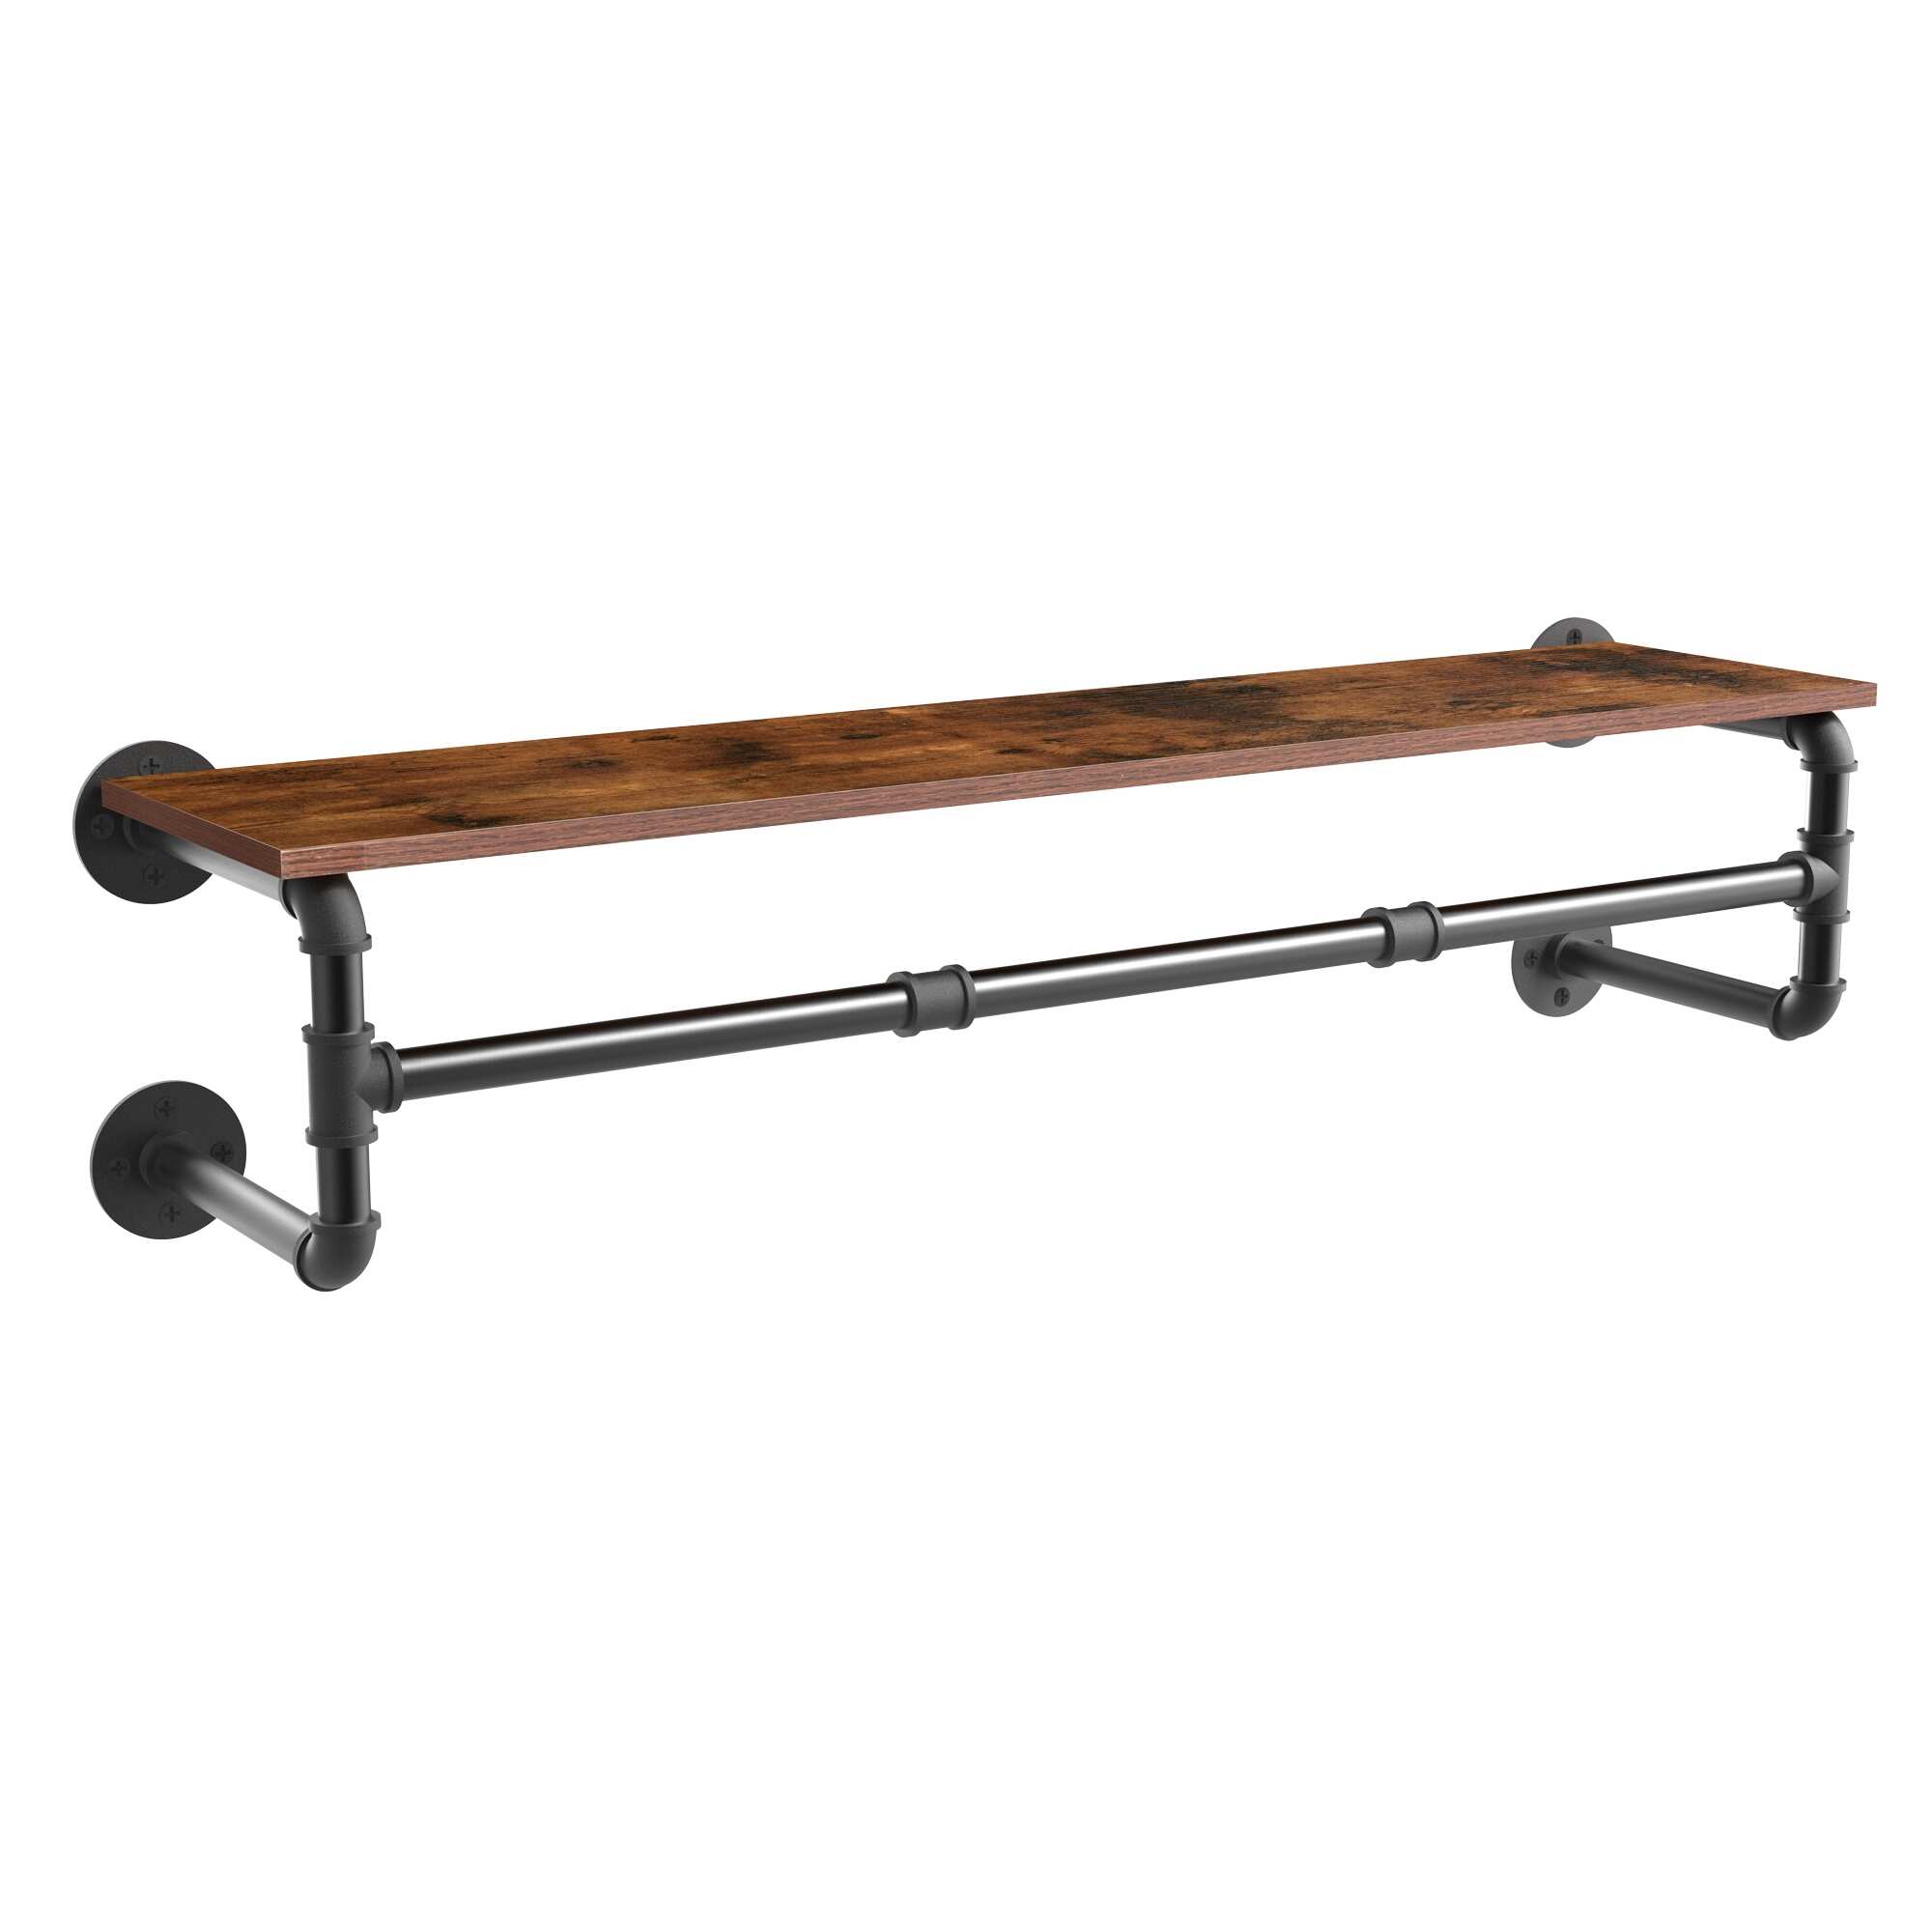 Pipe Clothes Rail Wall Mounted Garment Hanging Rack - 41.3"